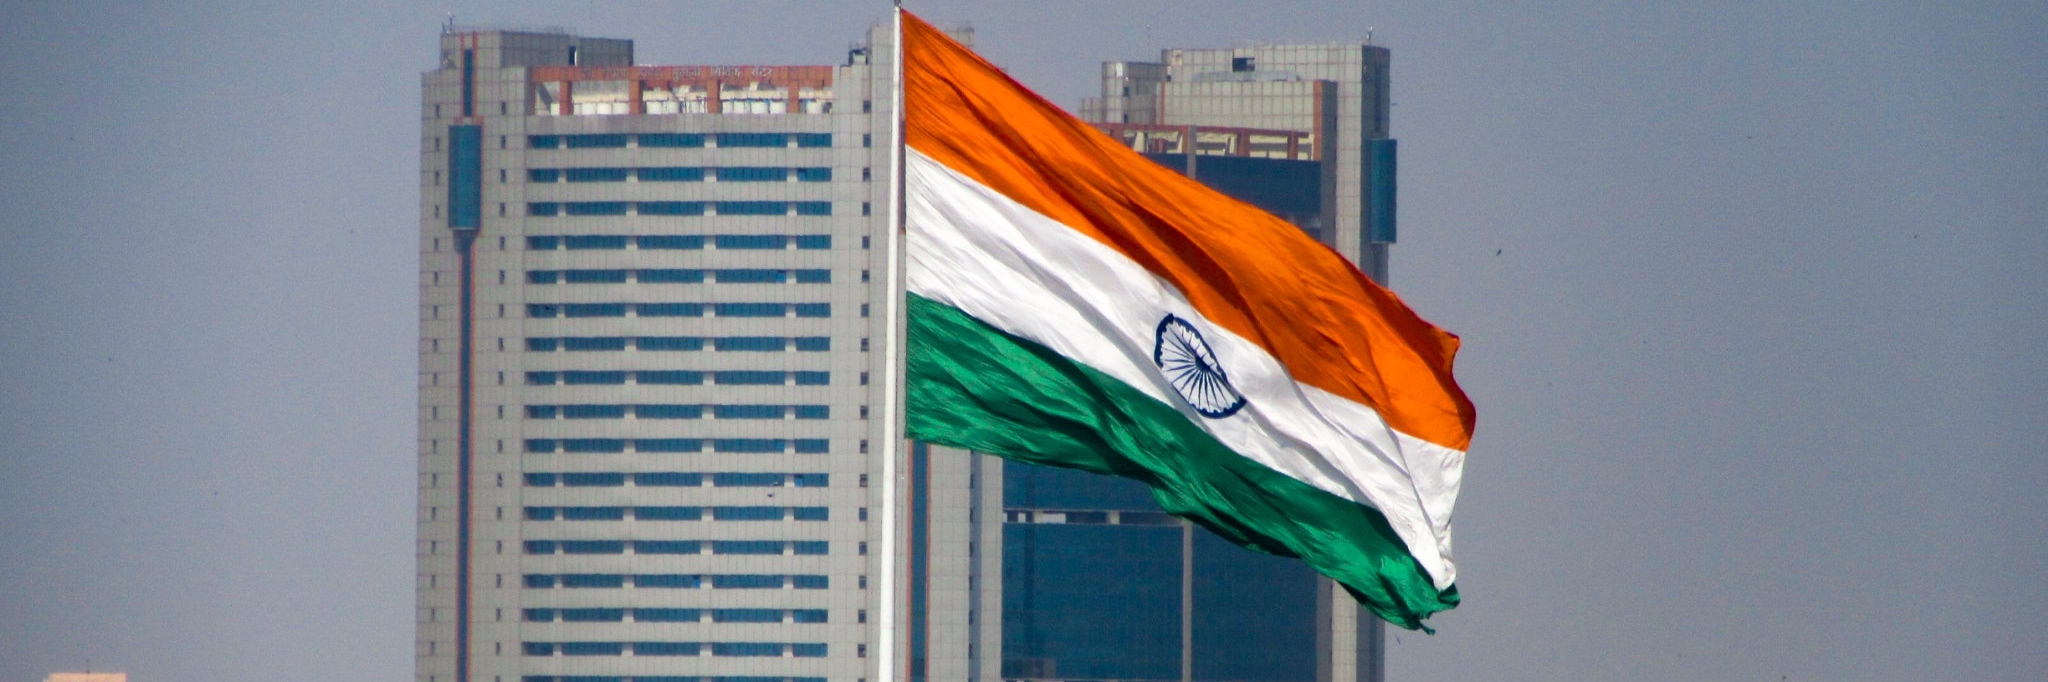 The Indian flag flies in front of two skyscrapers.